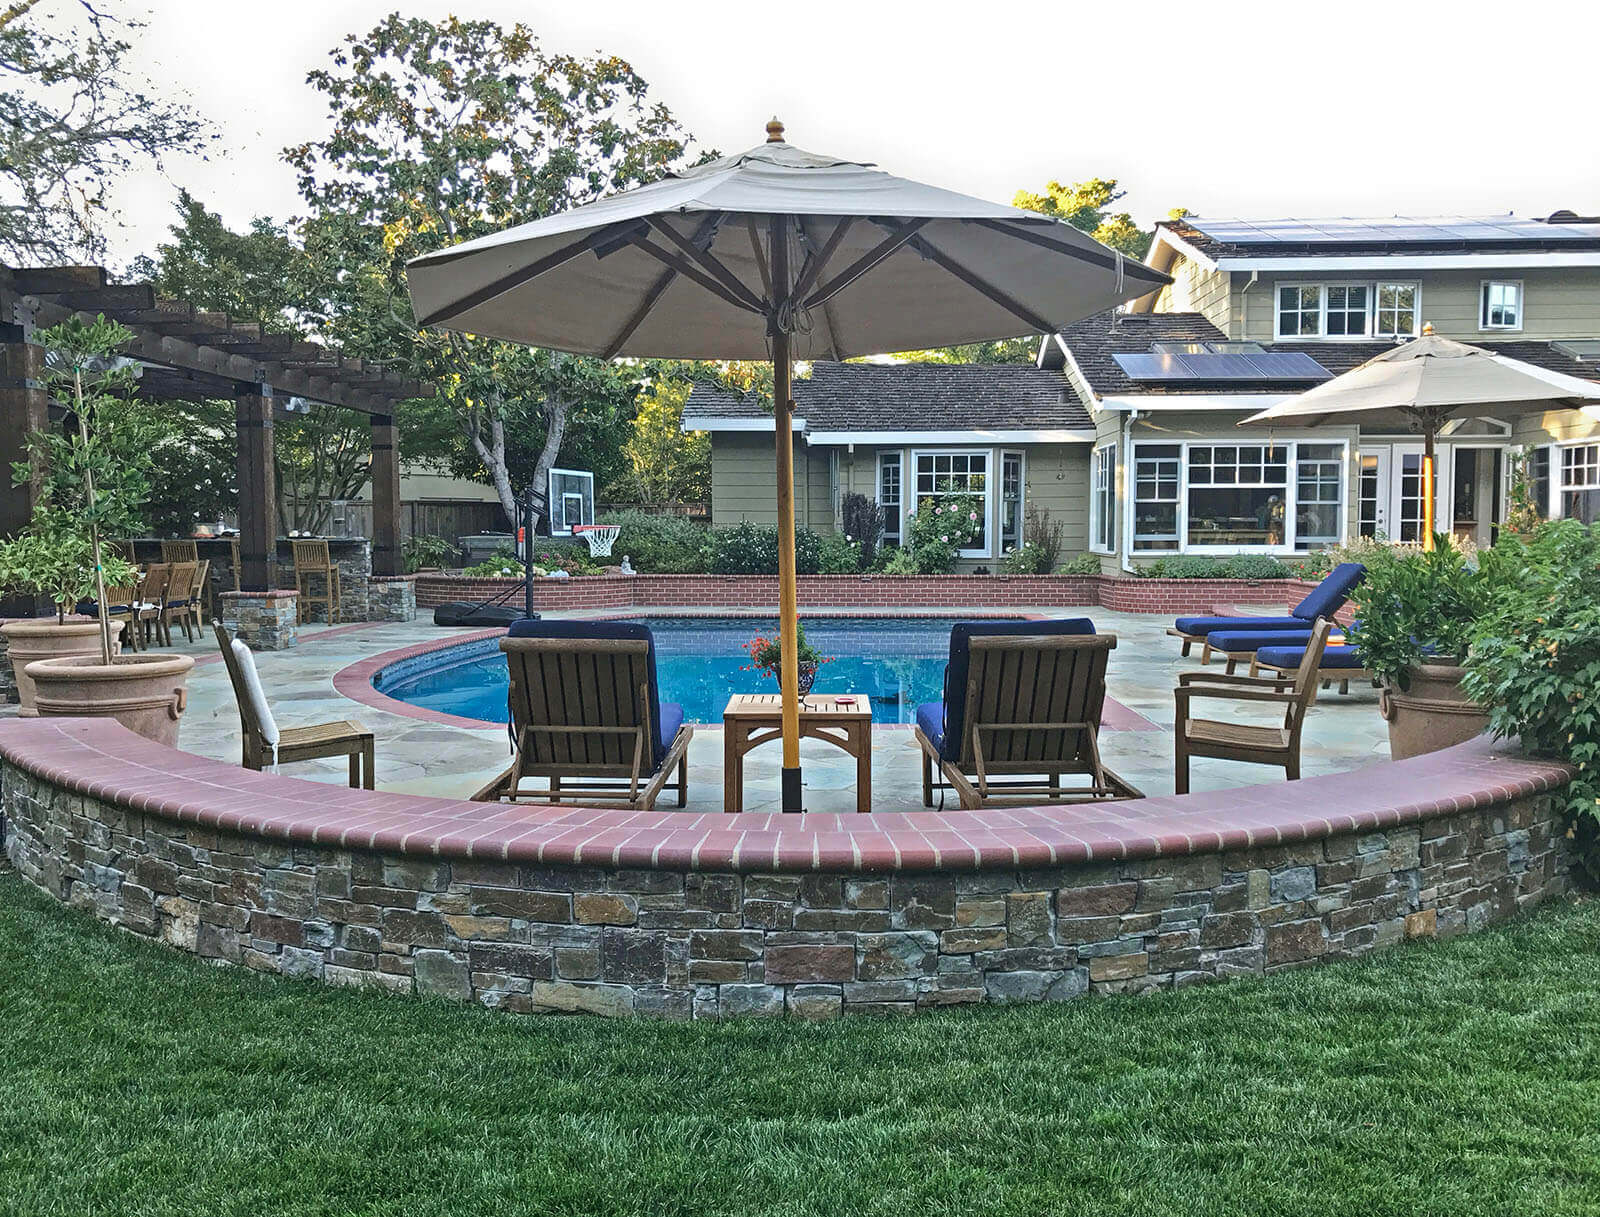 Brick-accented pool with surrounding stone tile patio, poolside pergola and lounge